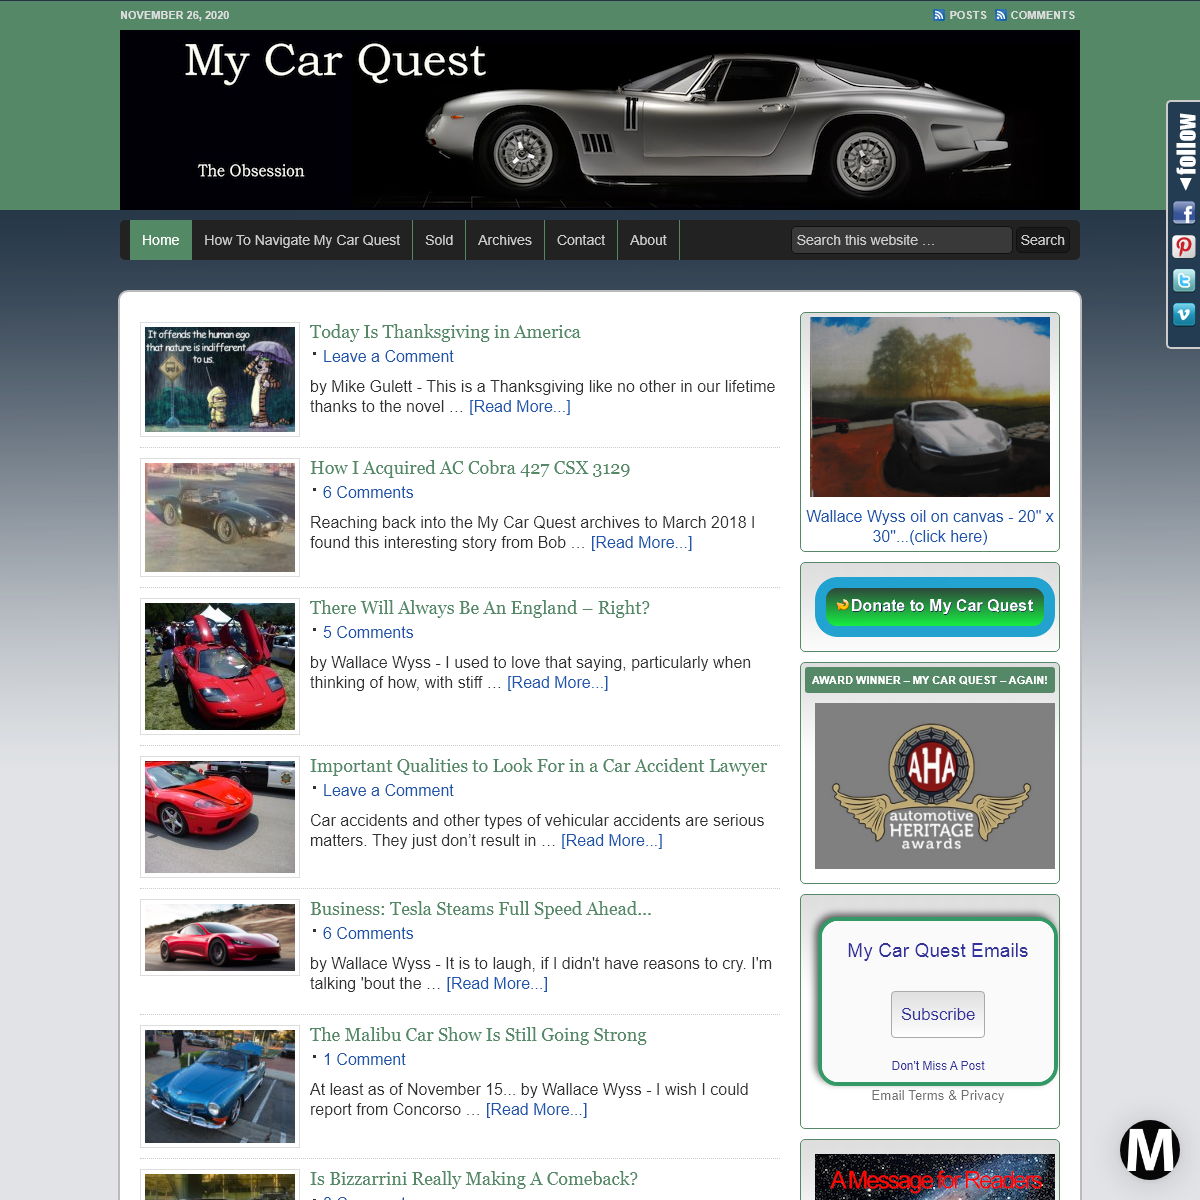 A complete backup of mycarquest.com